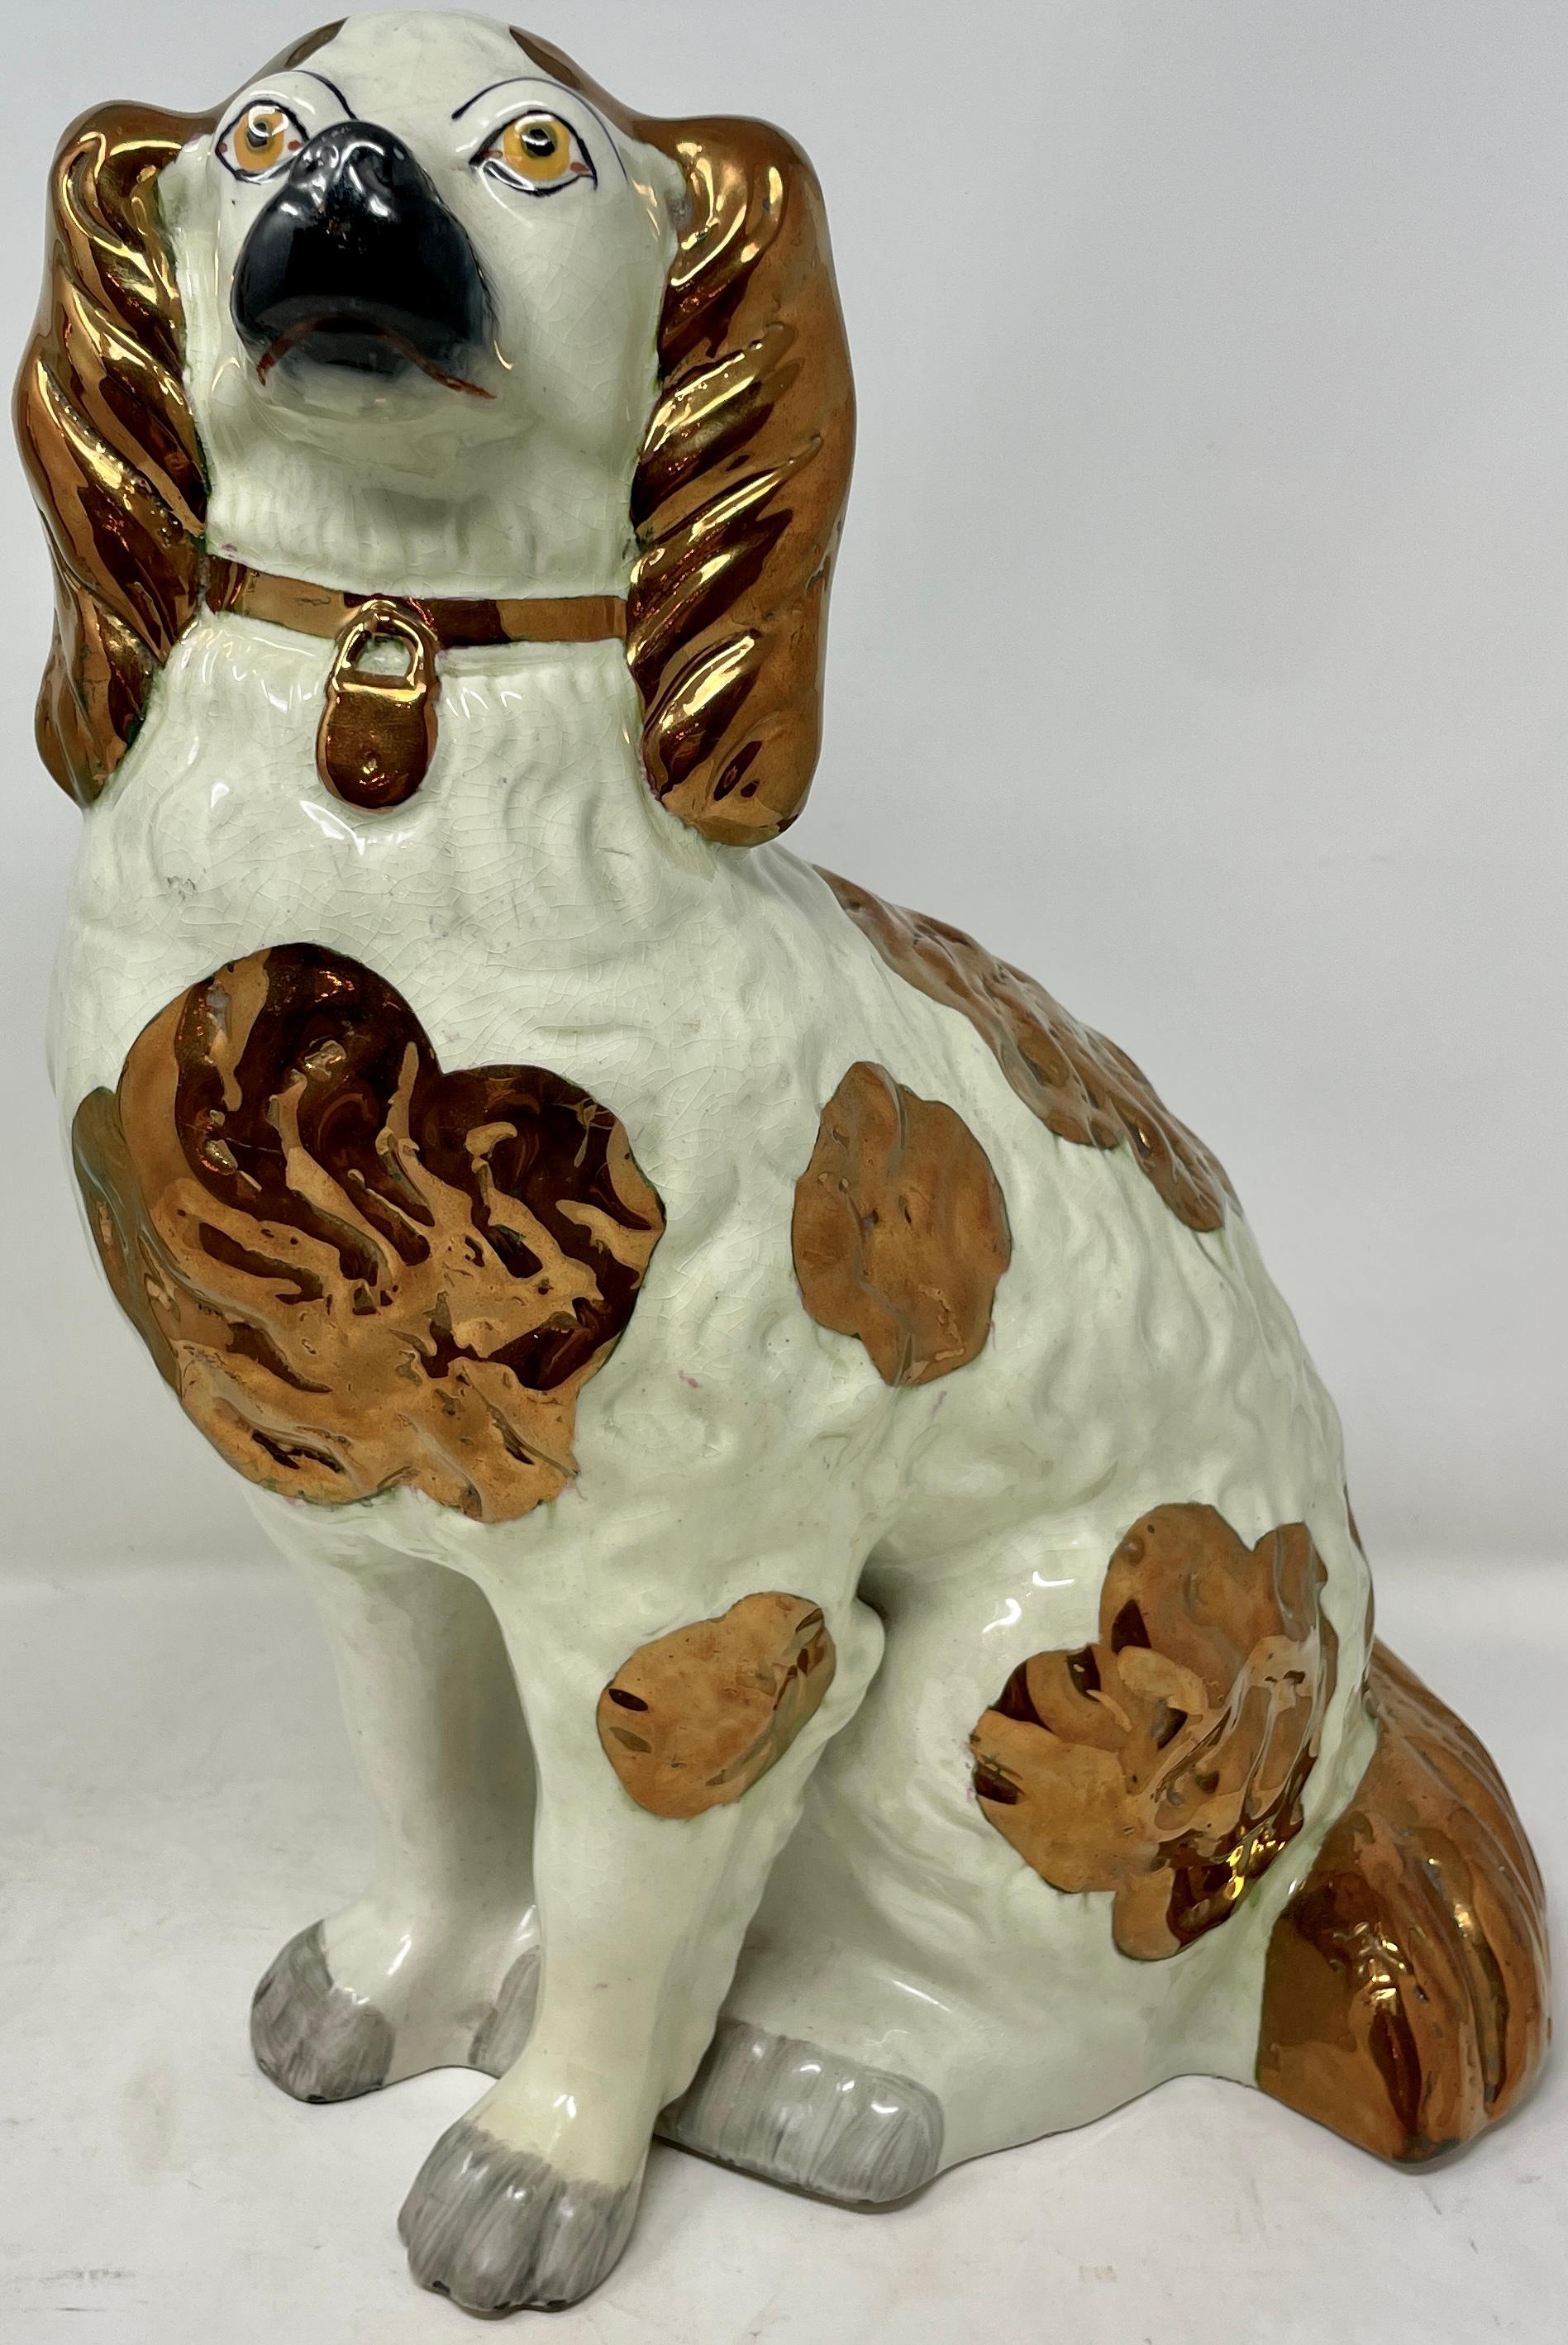 Rare & large pair antique English golden with white Staffordshire Porcelain King Charles Spaniel Dogs, circa 1900's. Last photo shows scale of dogs at bottom left.